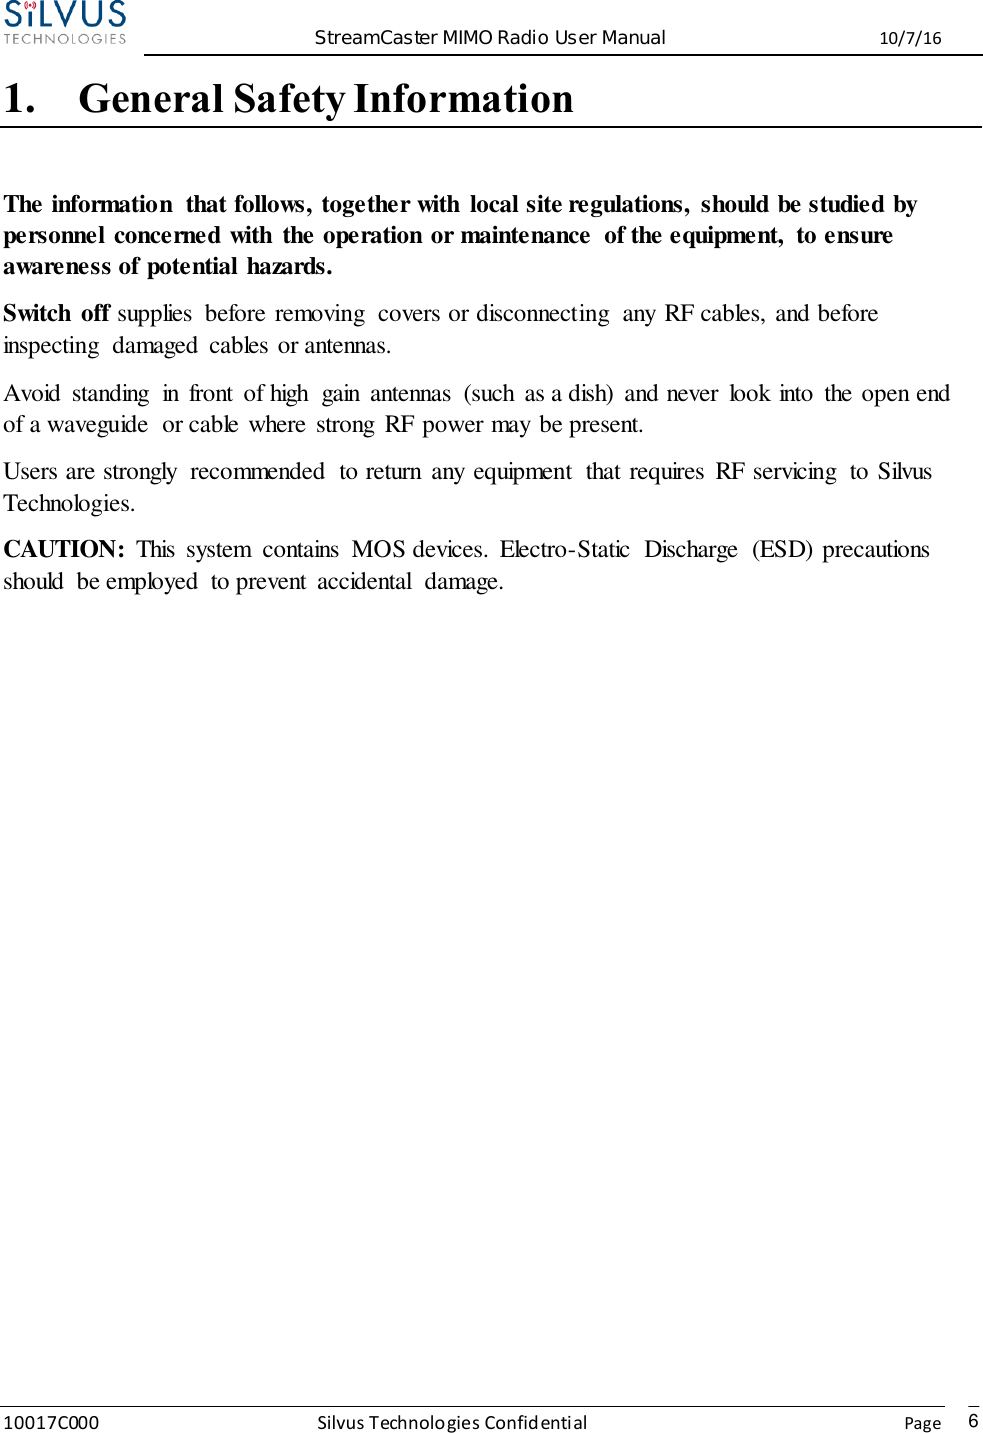  StreamCaster MIMO Radio User Manual  10/7/16 10017C000 Silvus Technologies Confidential    Page   6 1. General Safety Information The information  that follows, together with  local site regulations,  should be studied by personnel concerned with  the operation or maintenance  of the equipment,  to ensure awareness of potential hazards.   Switch  off supplies  before removing  covers or disconnecting  any RF cables, and before inspecting  damaged  cables or antennas.   Avoid  standing  in  front  of high  gain  antennas  (such  as a dish)  and never  look into  the open end of a waveguide  or cable where  strong  RF power may be present.   Users are strongly  recommended  to return  any equipment  that requires  RF servicing  to Silvus Technologies. CAUTION:  This  system  contains  MOS devices.  Electro-Static  Discharge  (ESD) precautions should  be employed  to prevent  accidental  damage.              